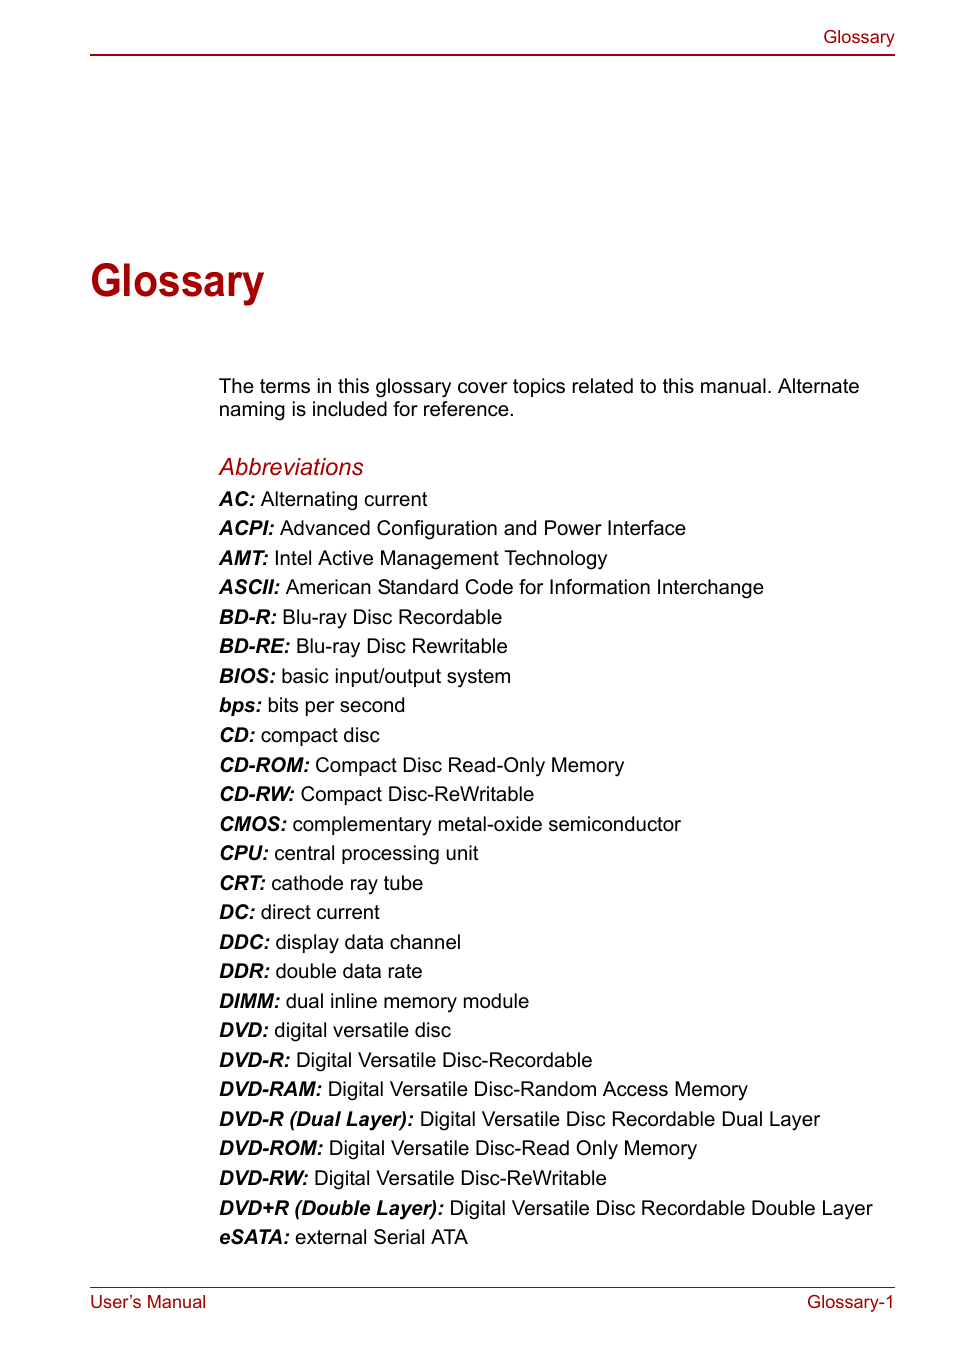 Glossary | Toshiba Satellite Pro C660D User Manual | Page 149 / 153